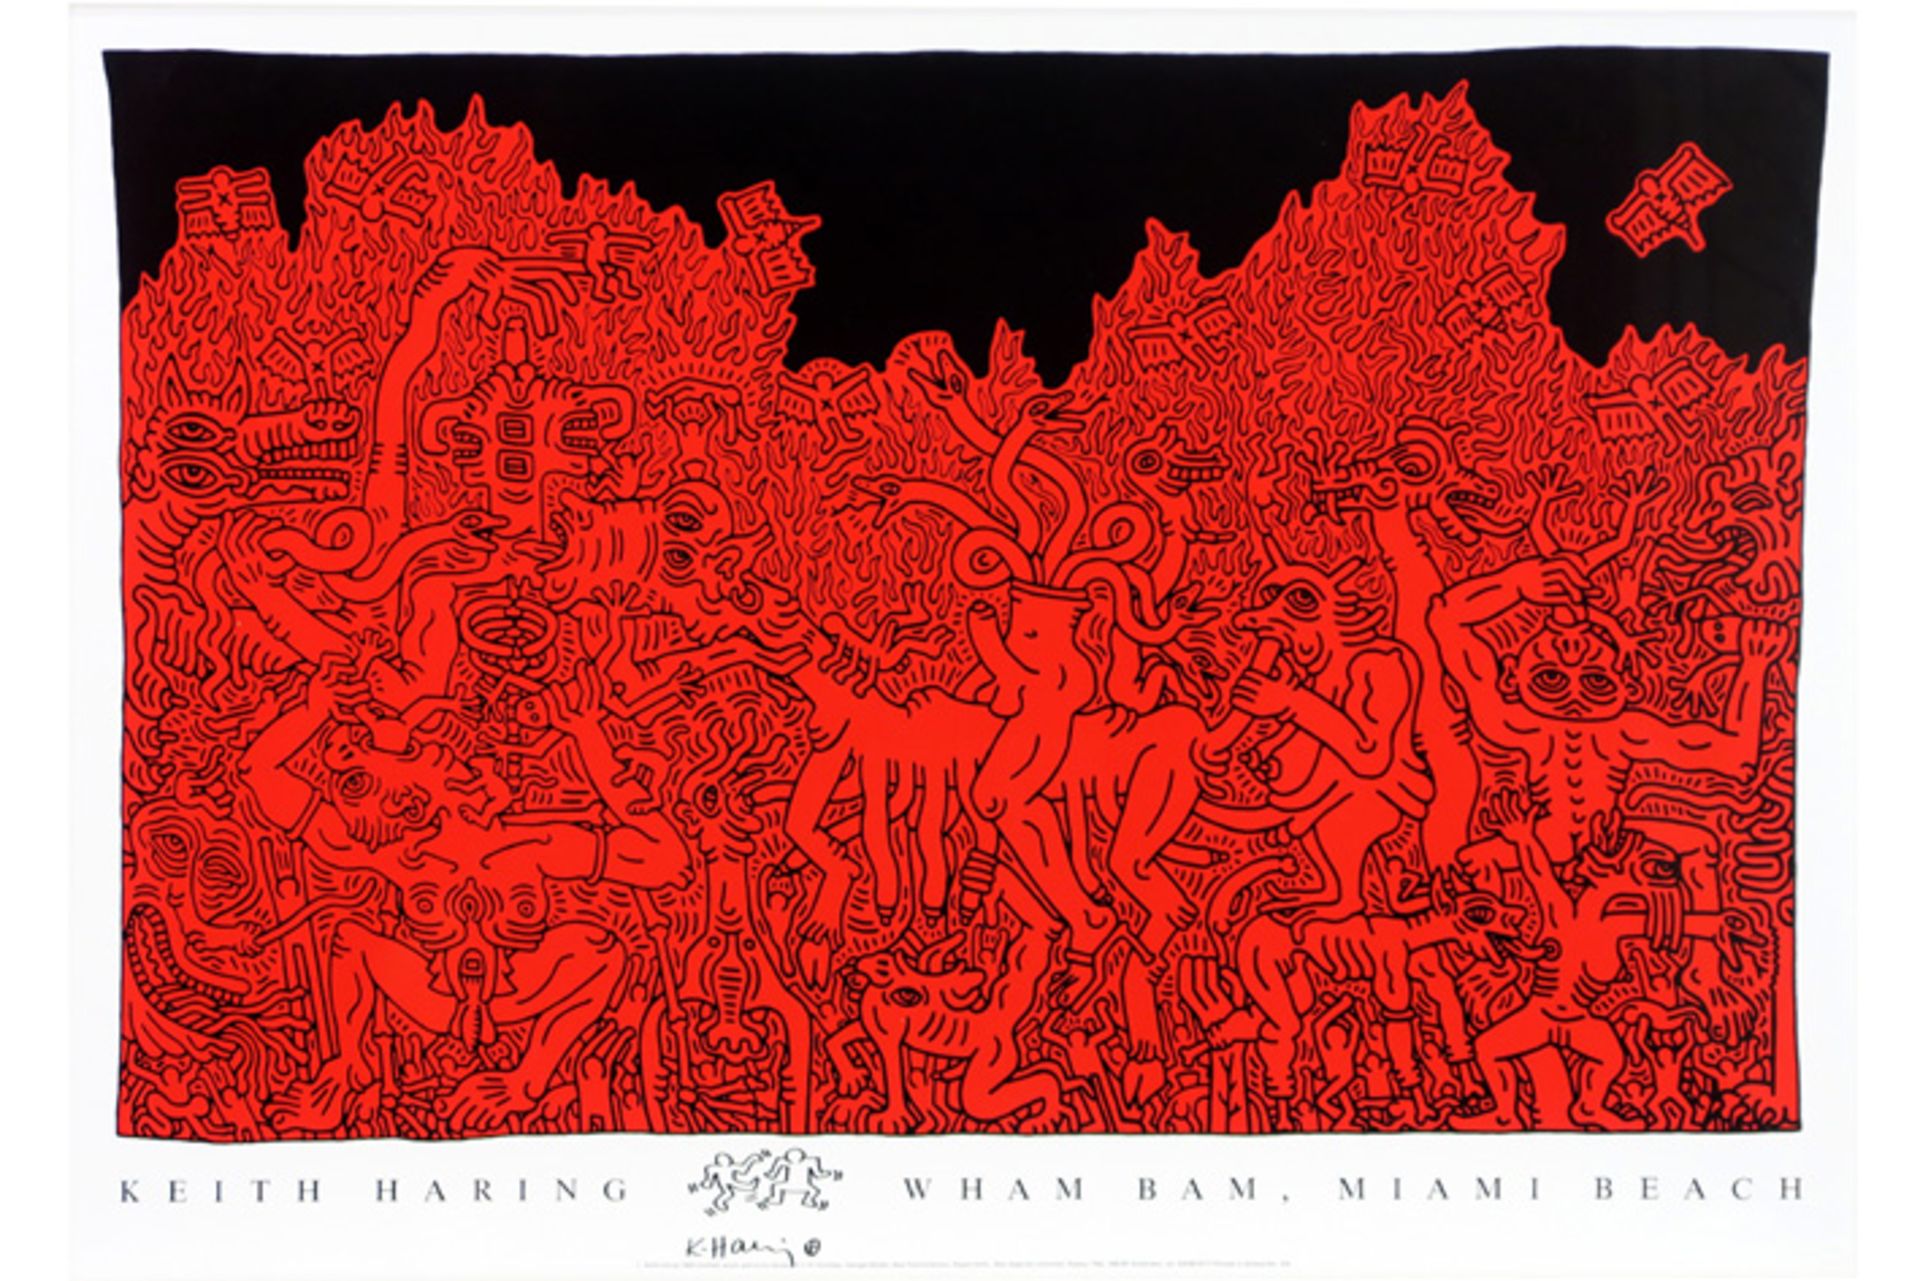 Keith Haring signed drawing with typical figures on a poster for "Wham Bam Miami Beach" dd 1989